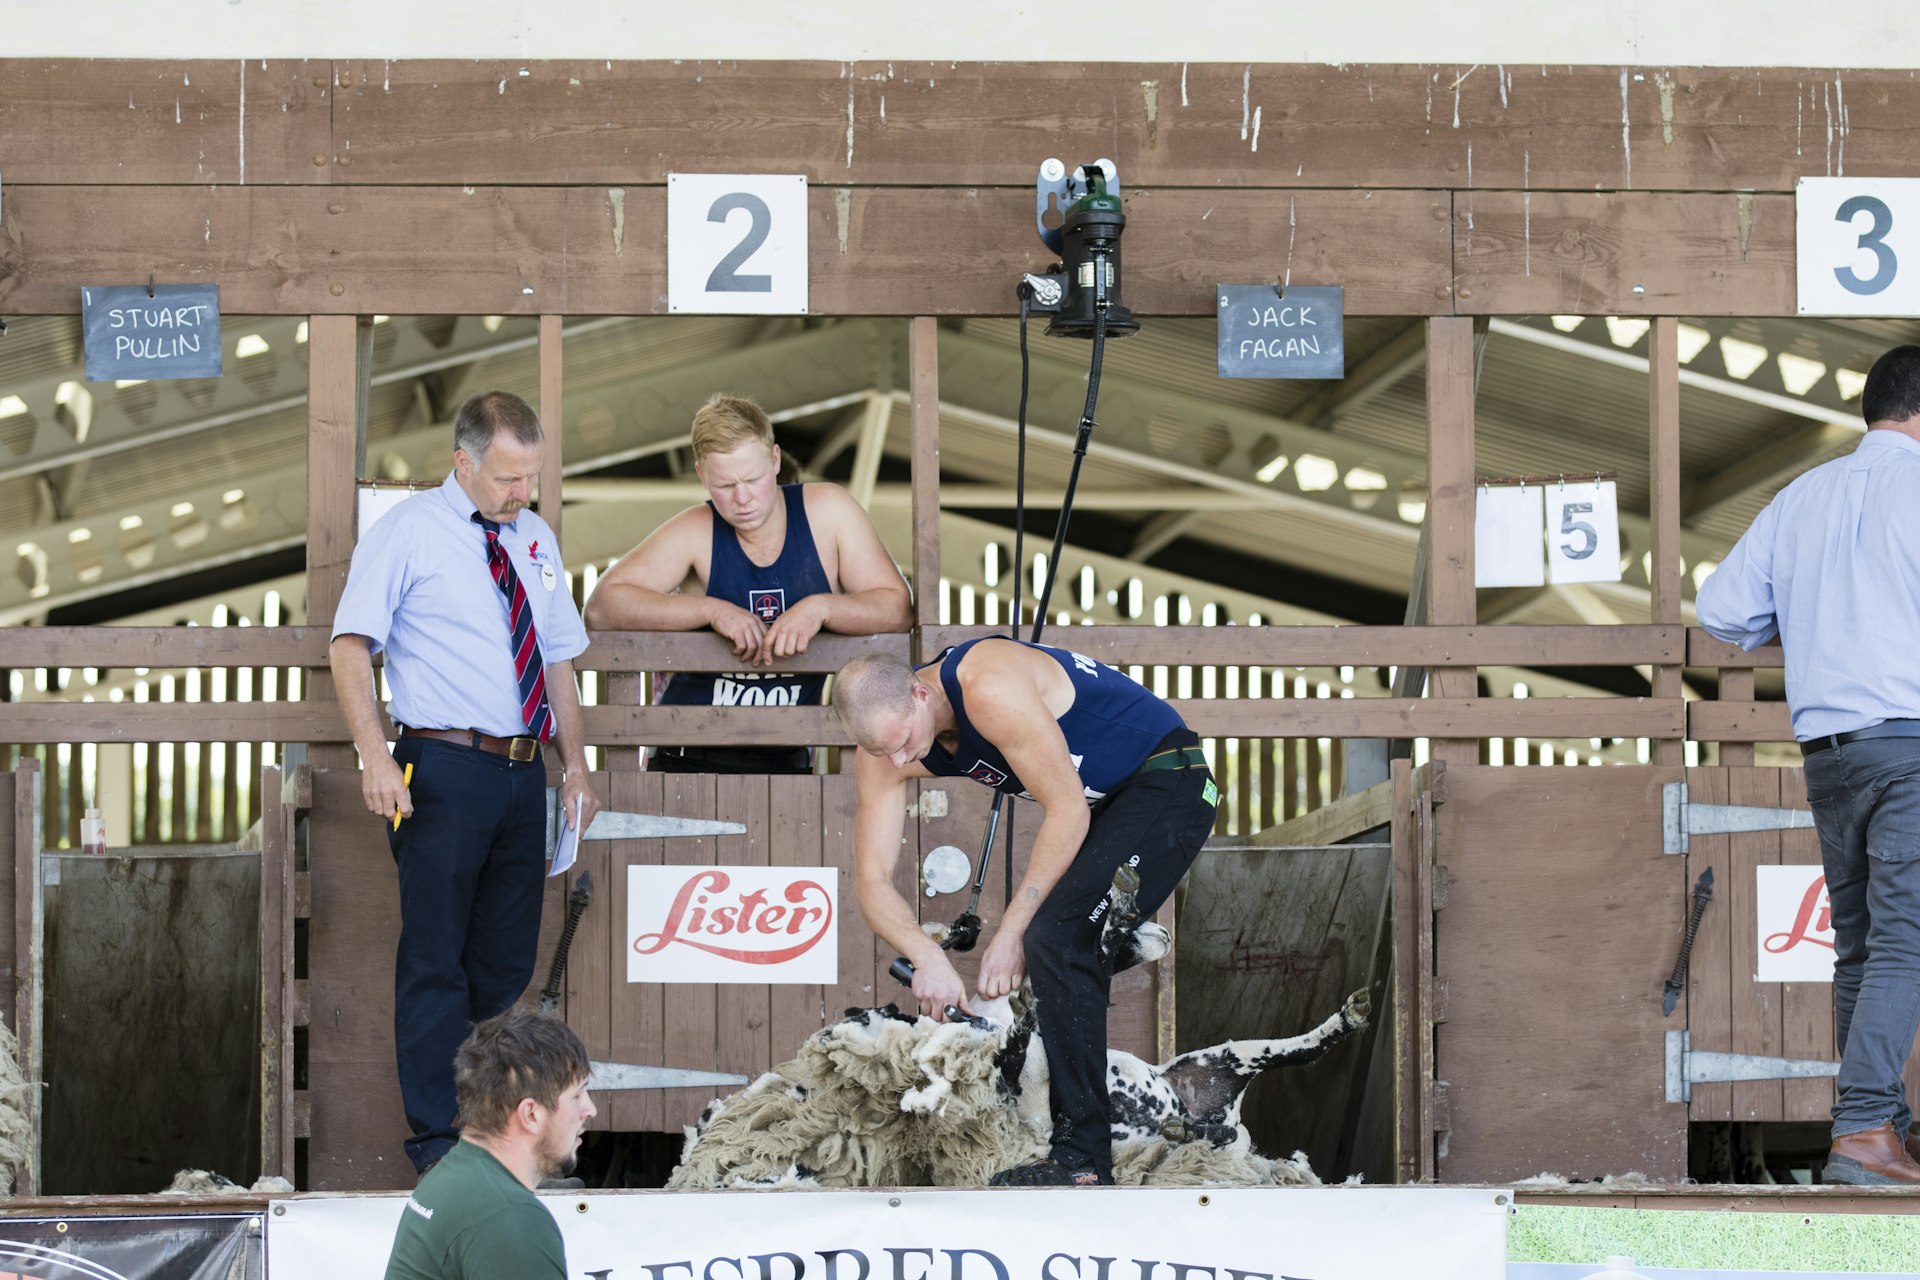 A sheep shearing competition